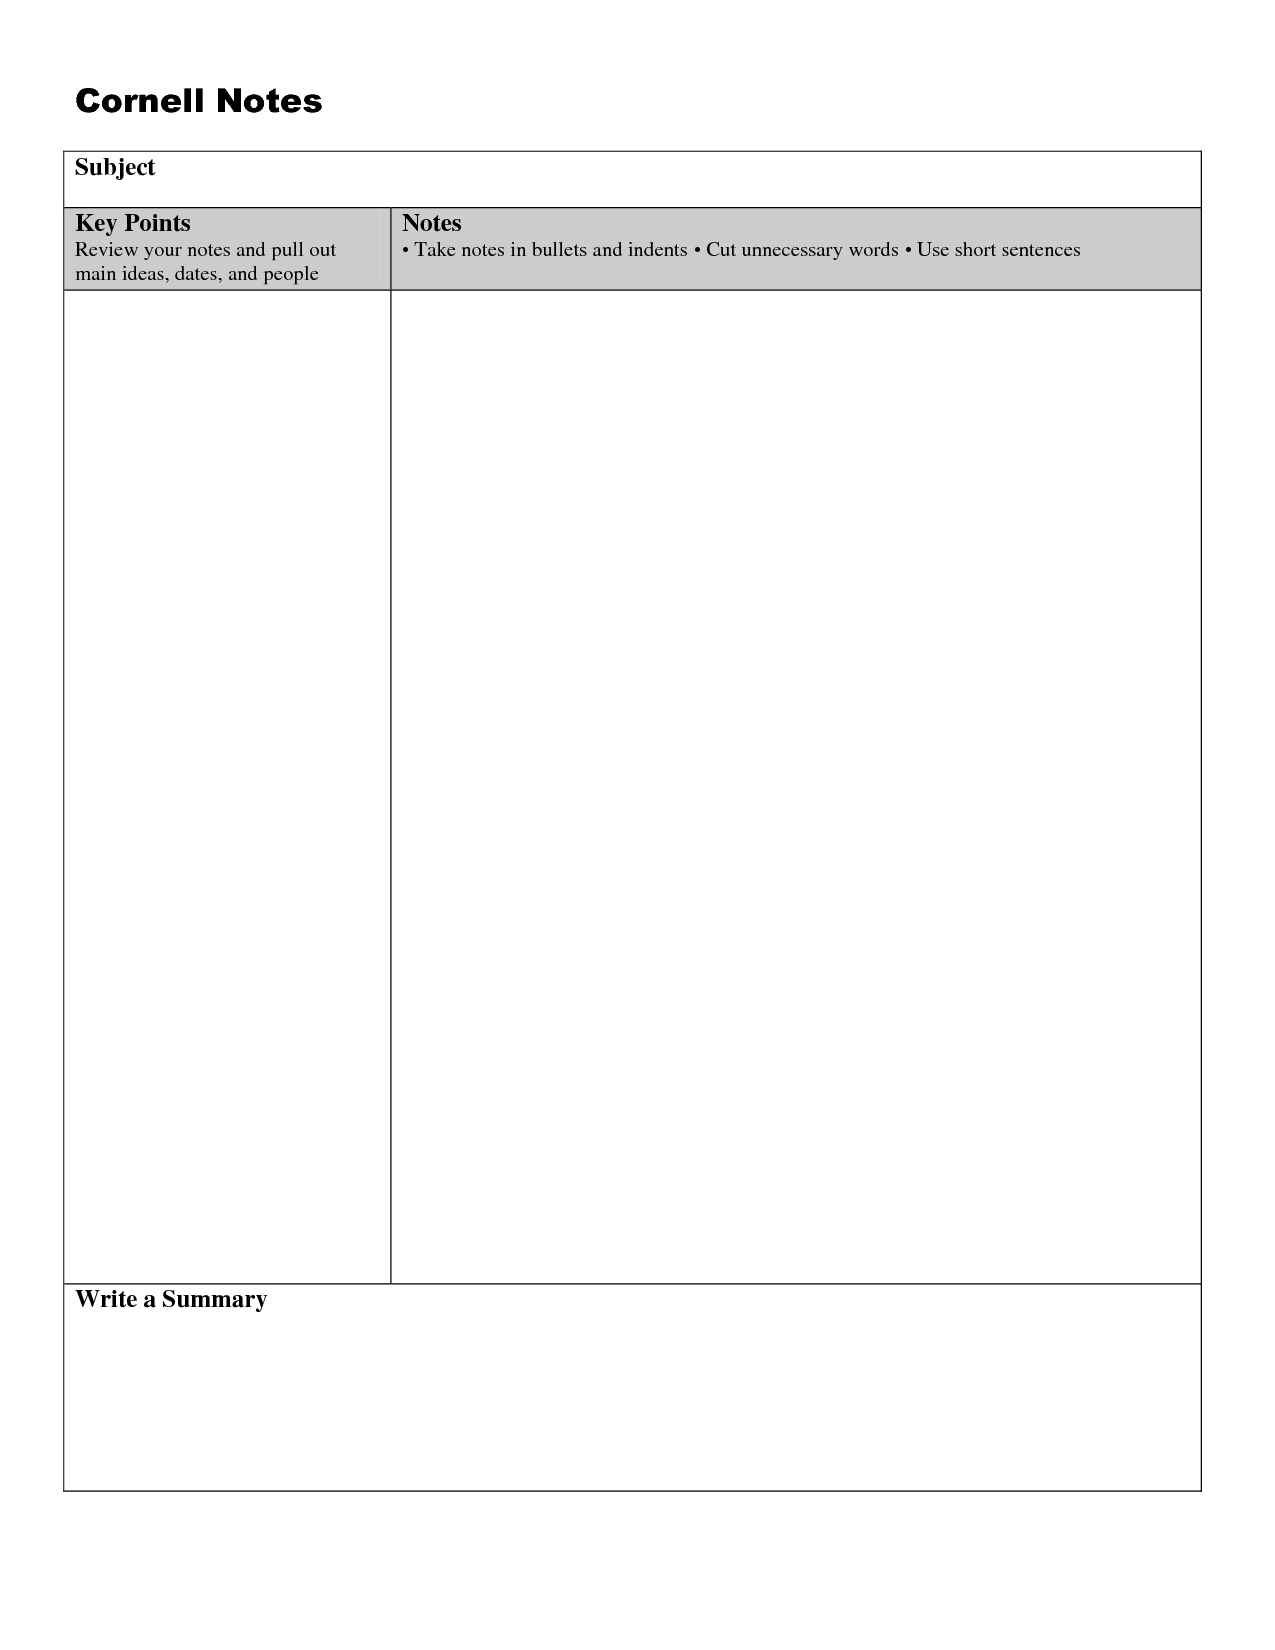 005 Note Taking Template Word Ideas Unforgettable Cornell Regarding Cornell Note Taking Template Word